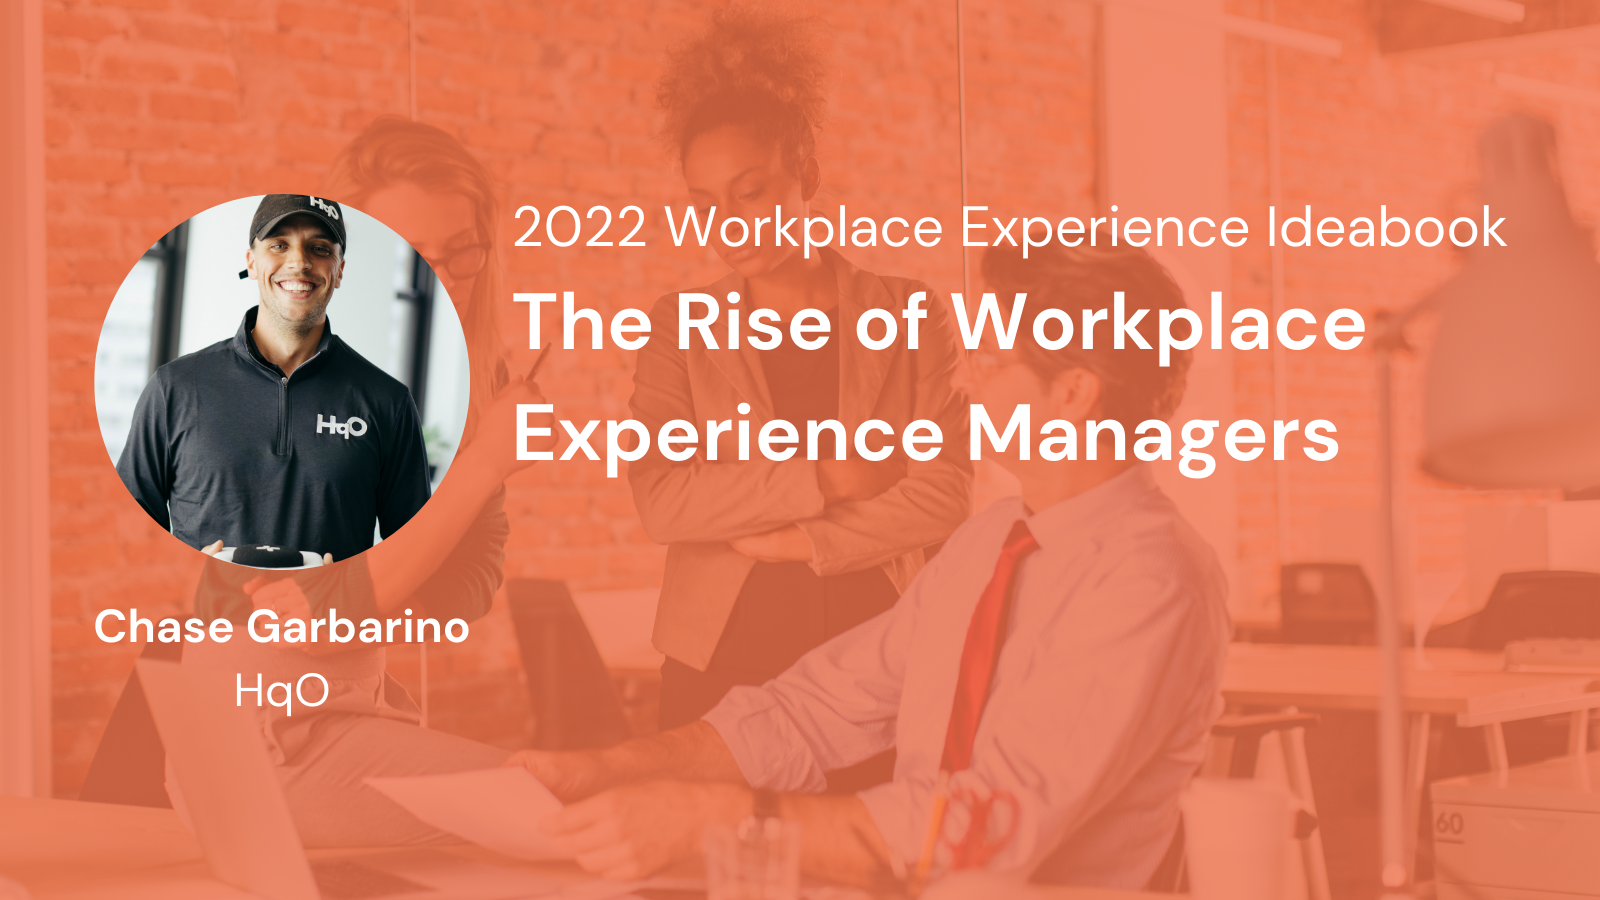 The Rise of Workplace Experience Managers - Chase Garbarino